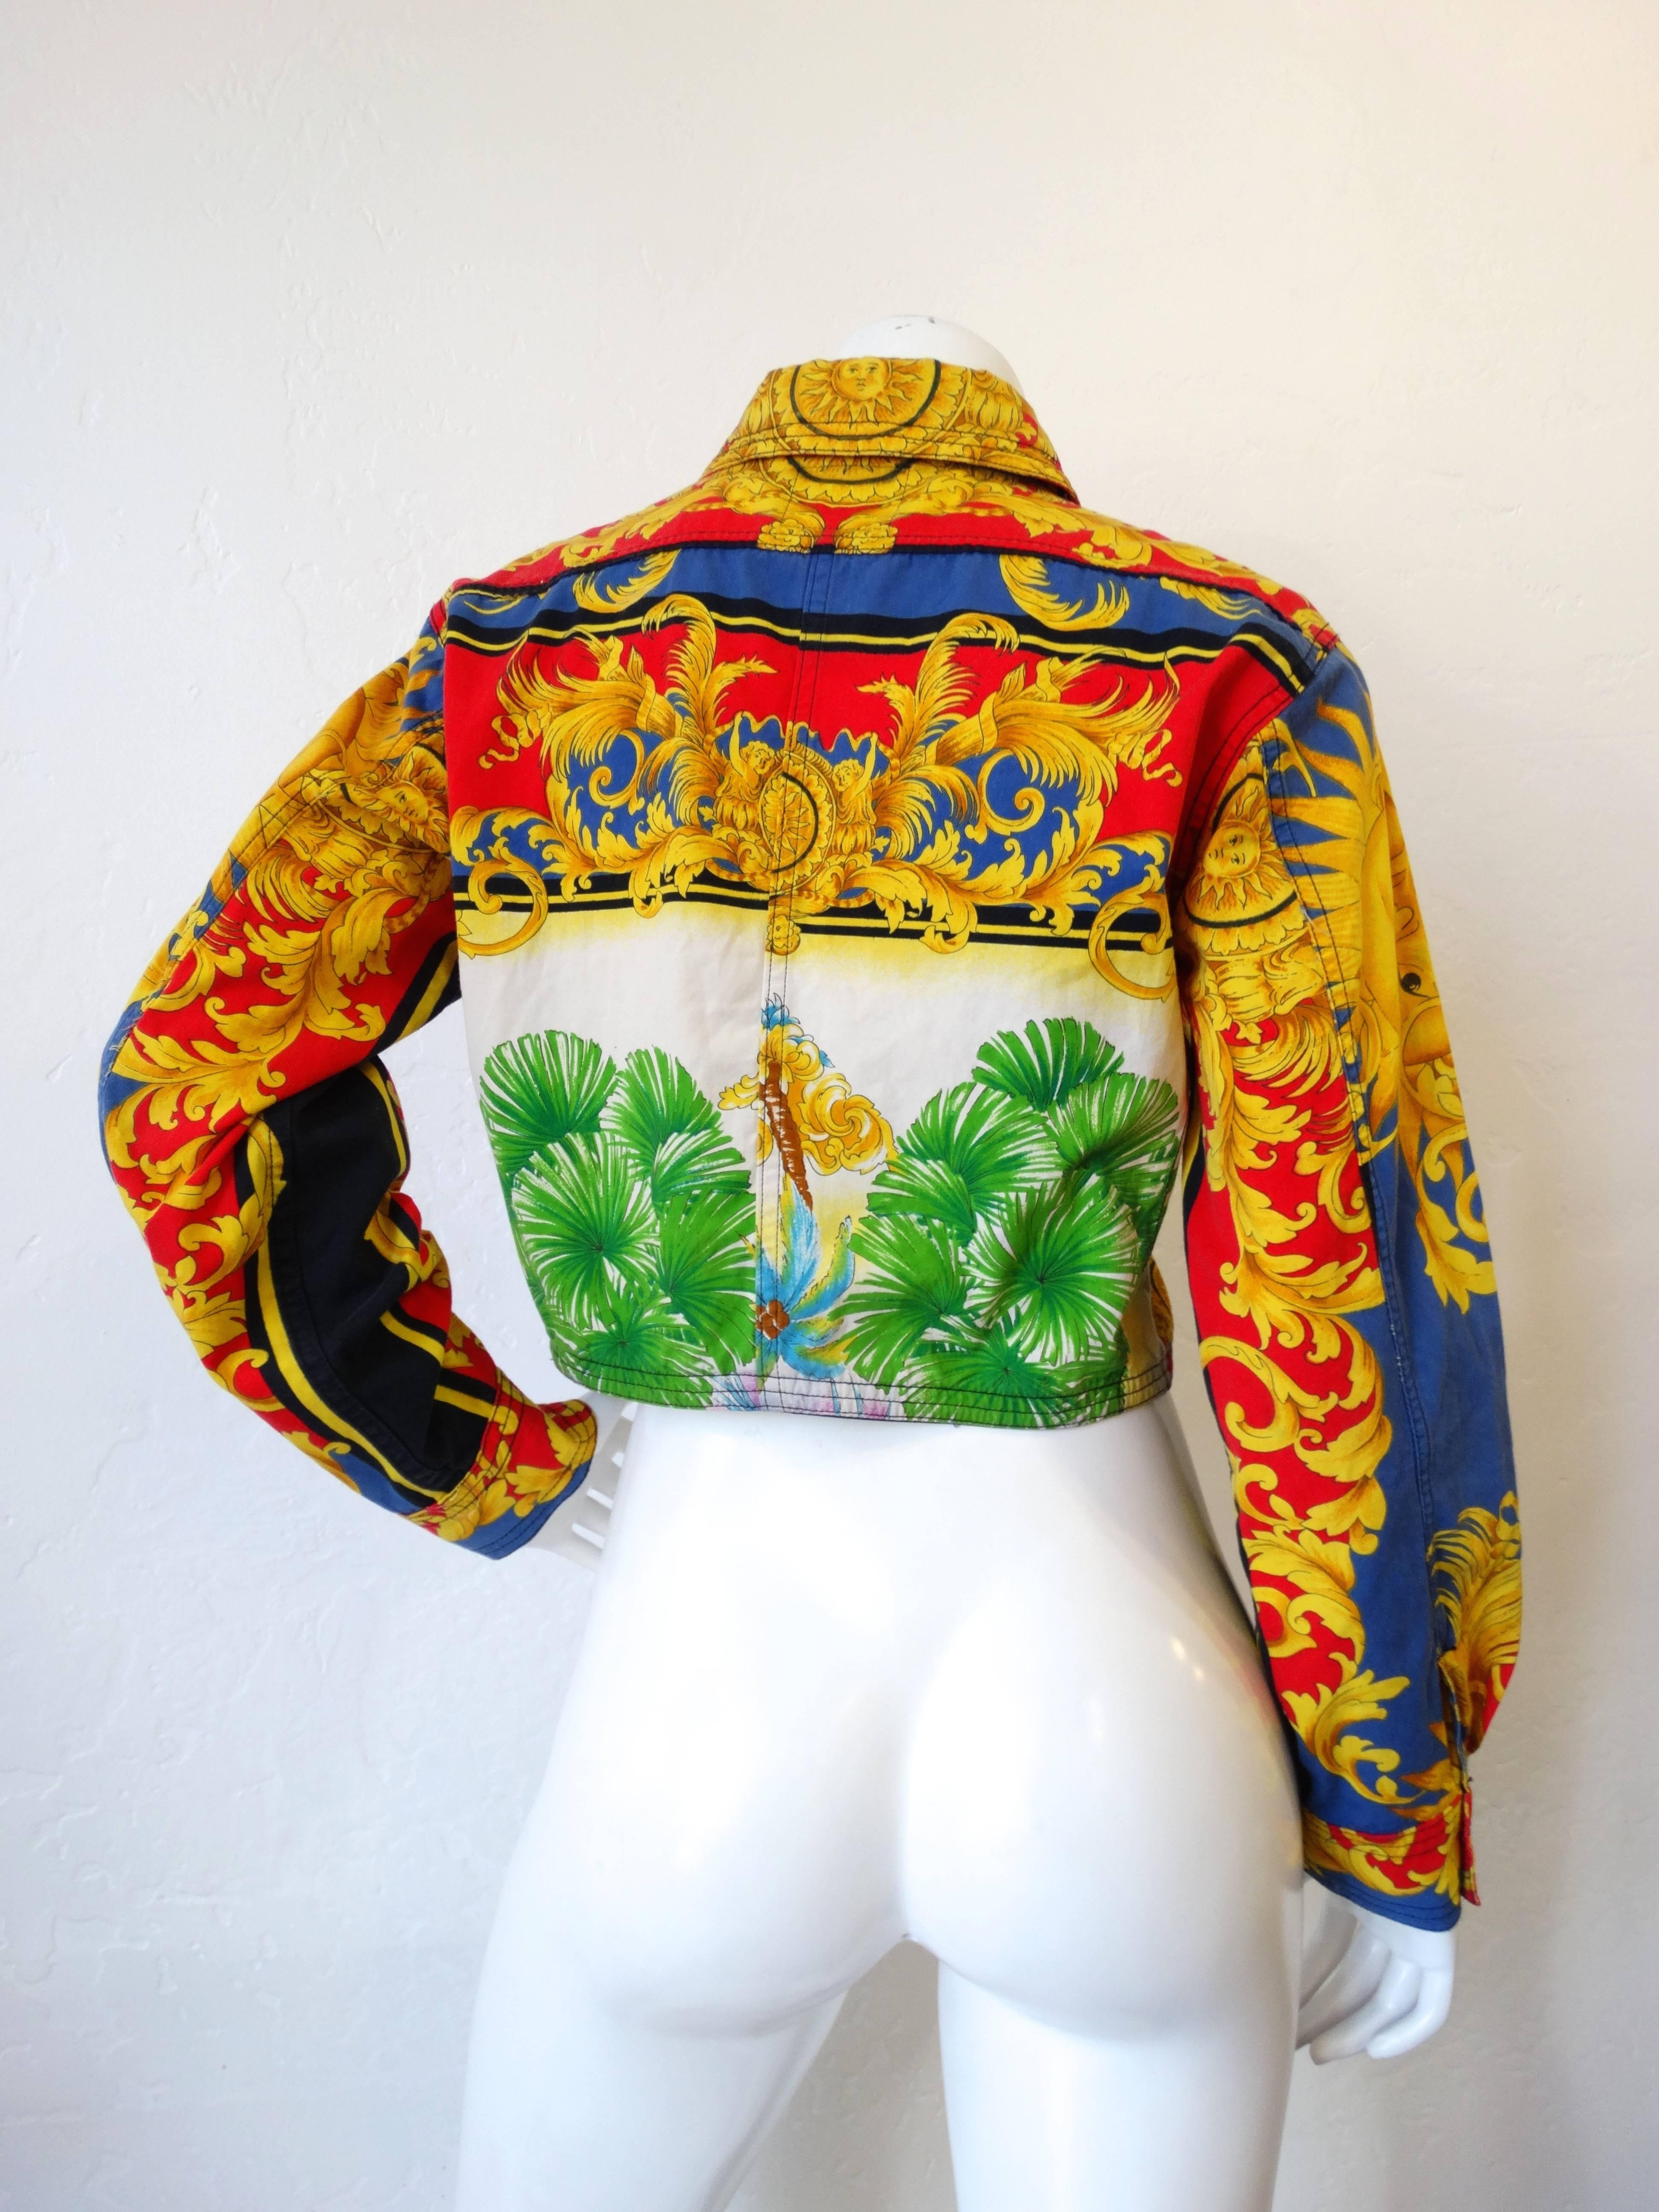 Gianni Versace Baroque Sun Miami Print Jeans Jacket Spring 1993 In Excellent Condition In Scottsdale, AZ